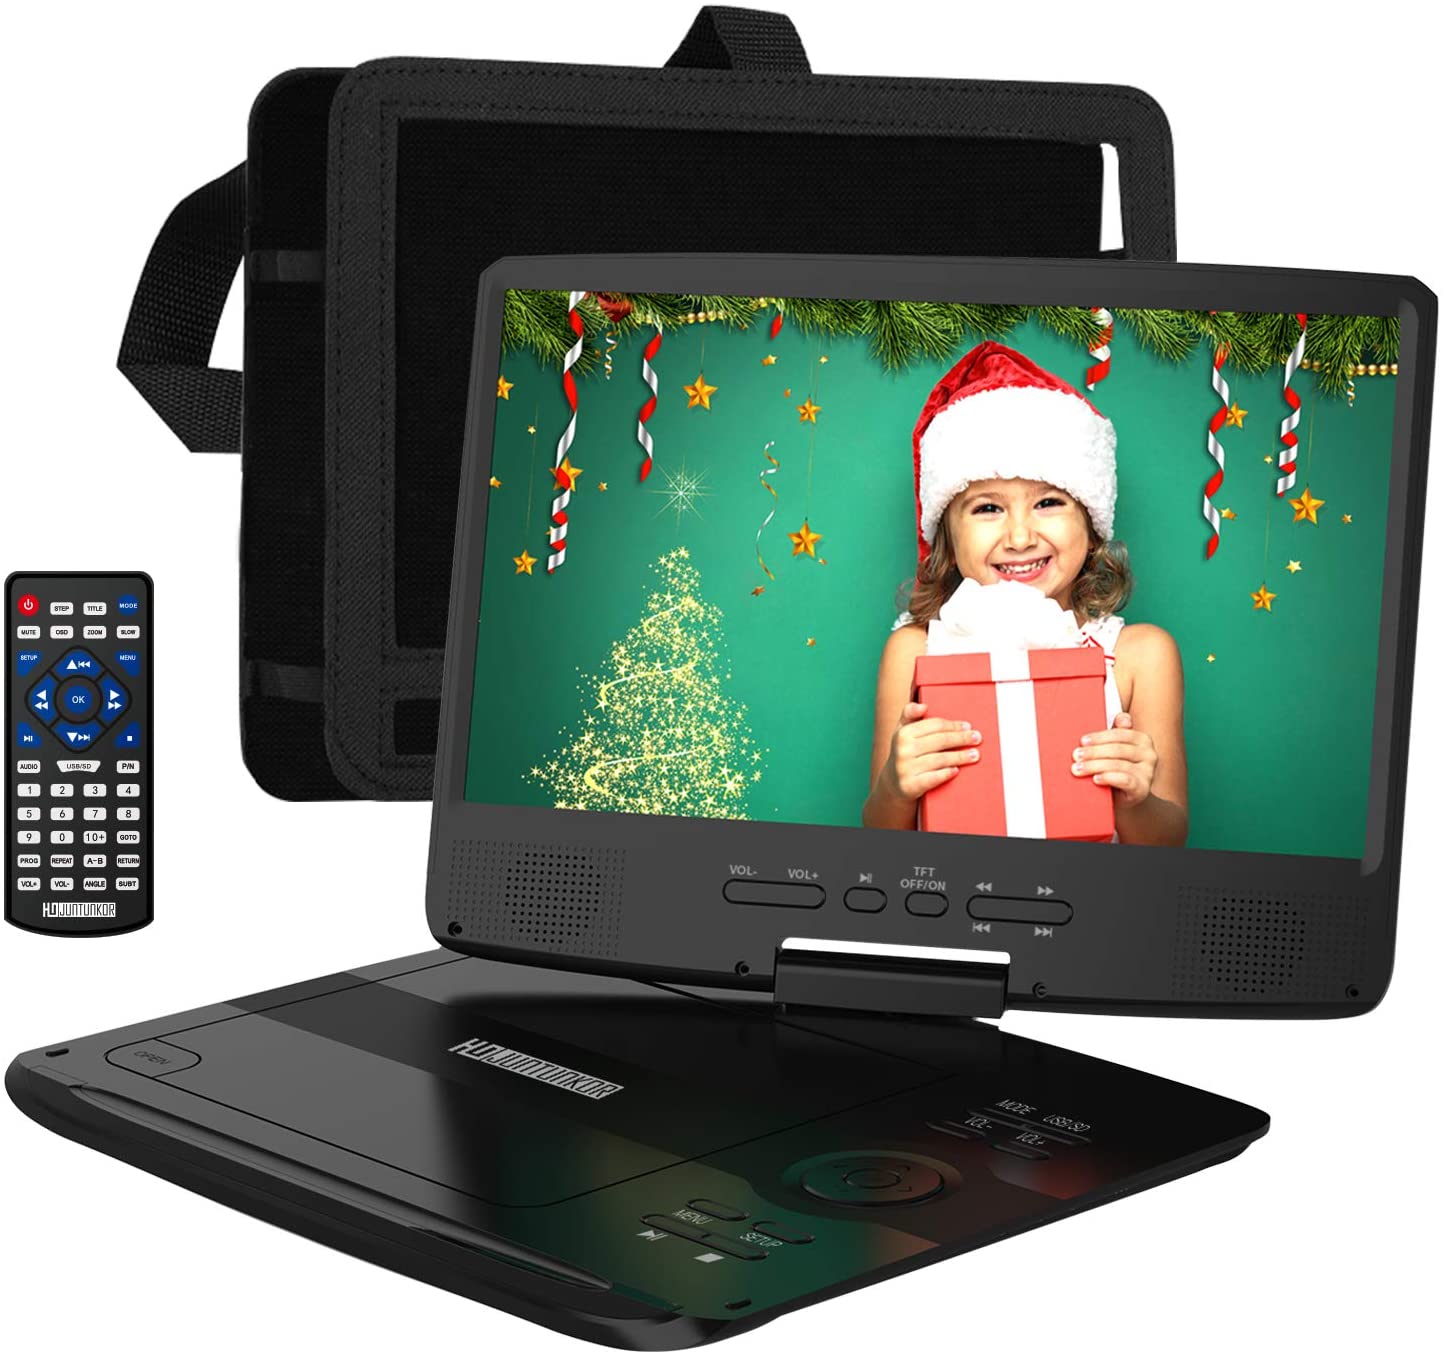 HDJUNTUNKOR LCD Syncable Portable DVD Player, 10.1-Inch